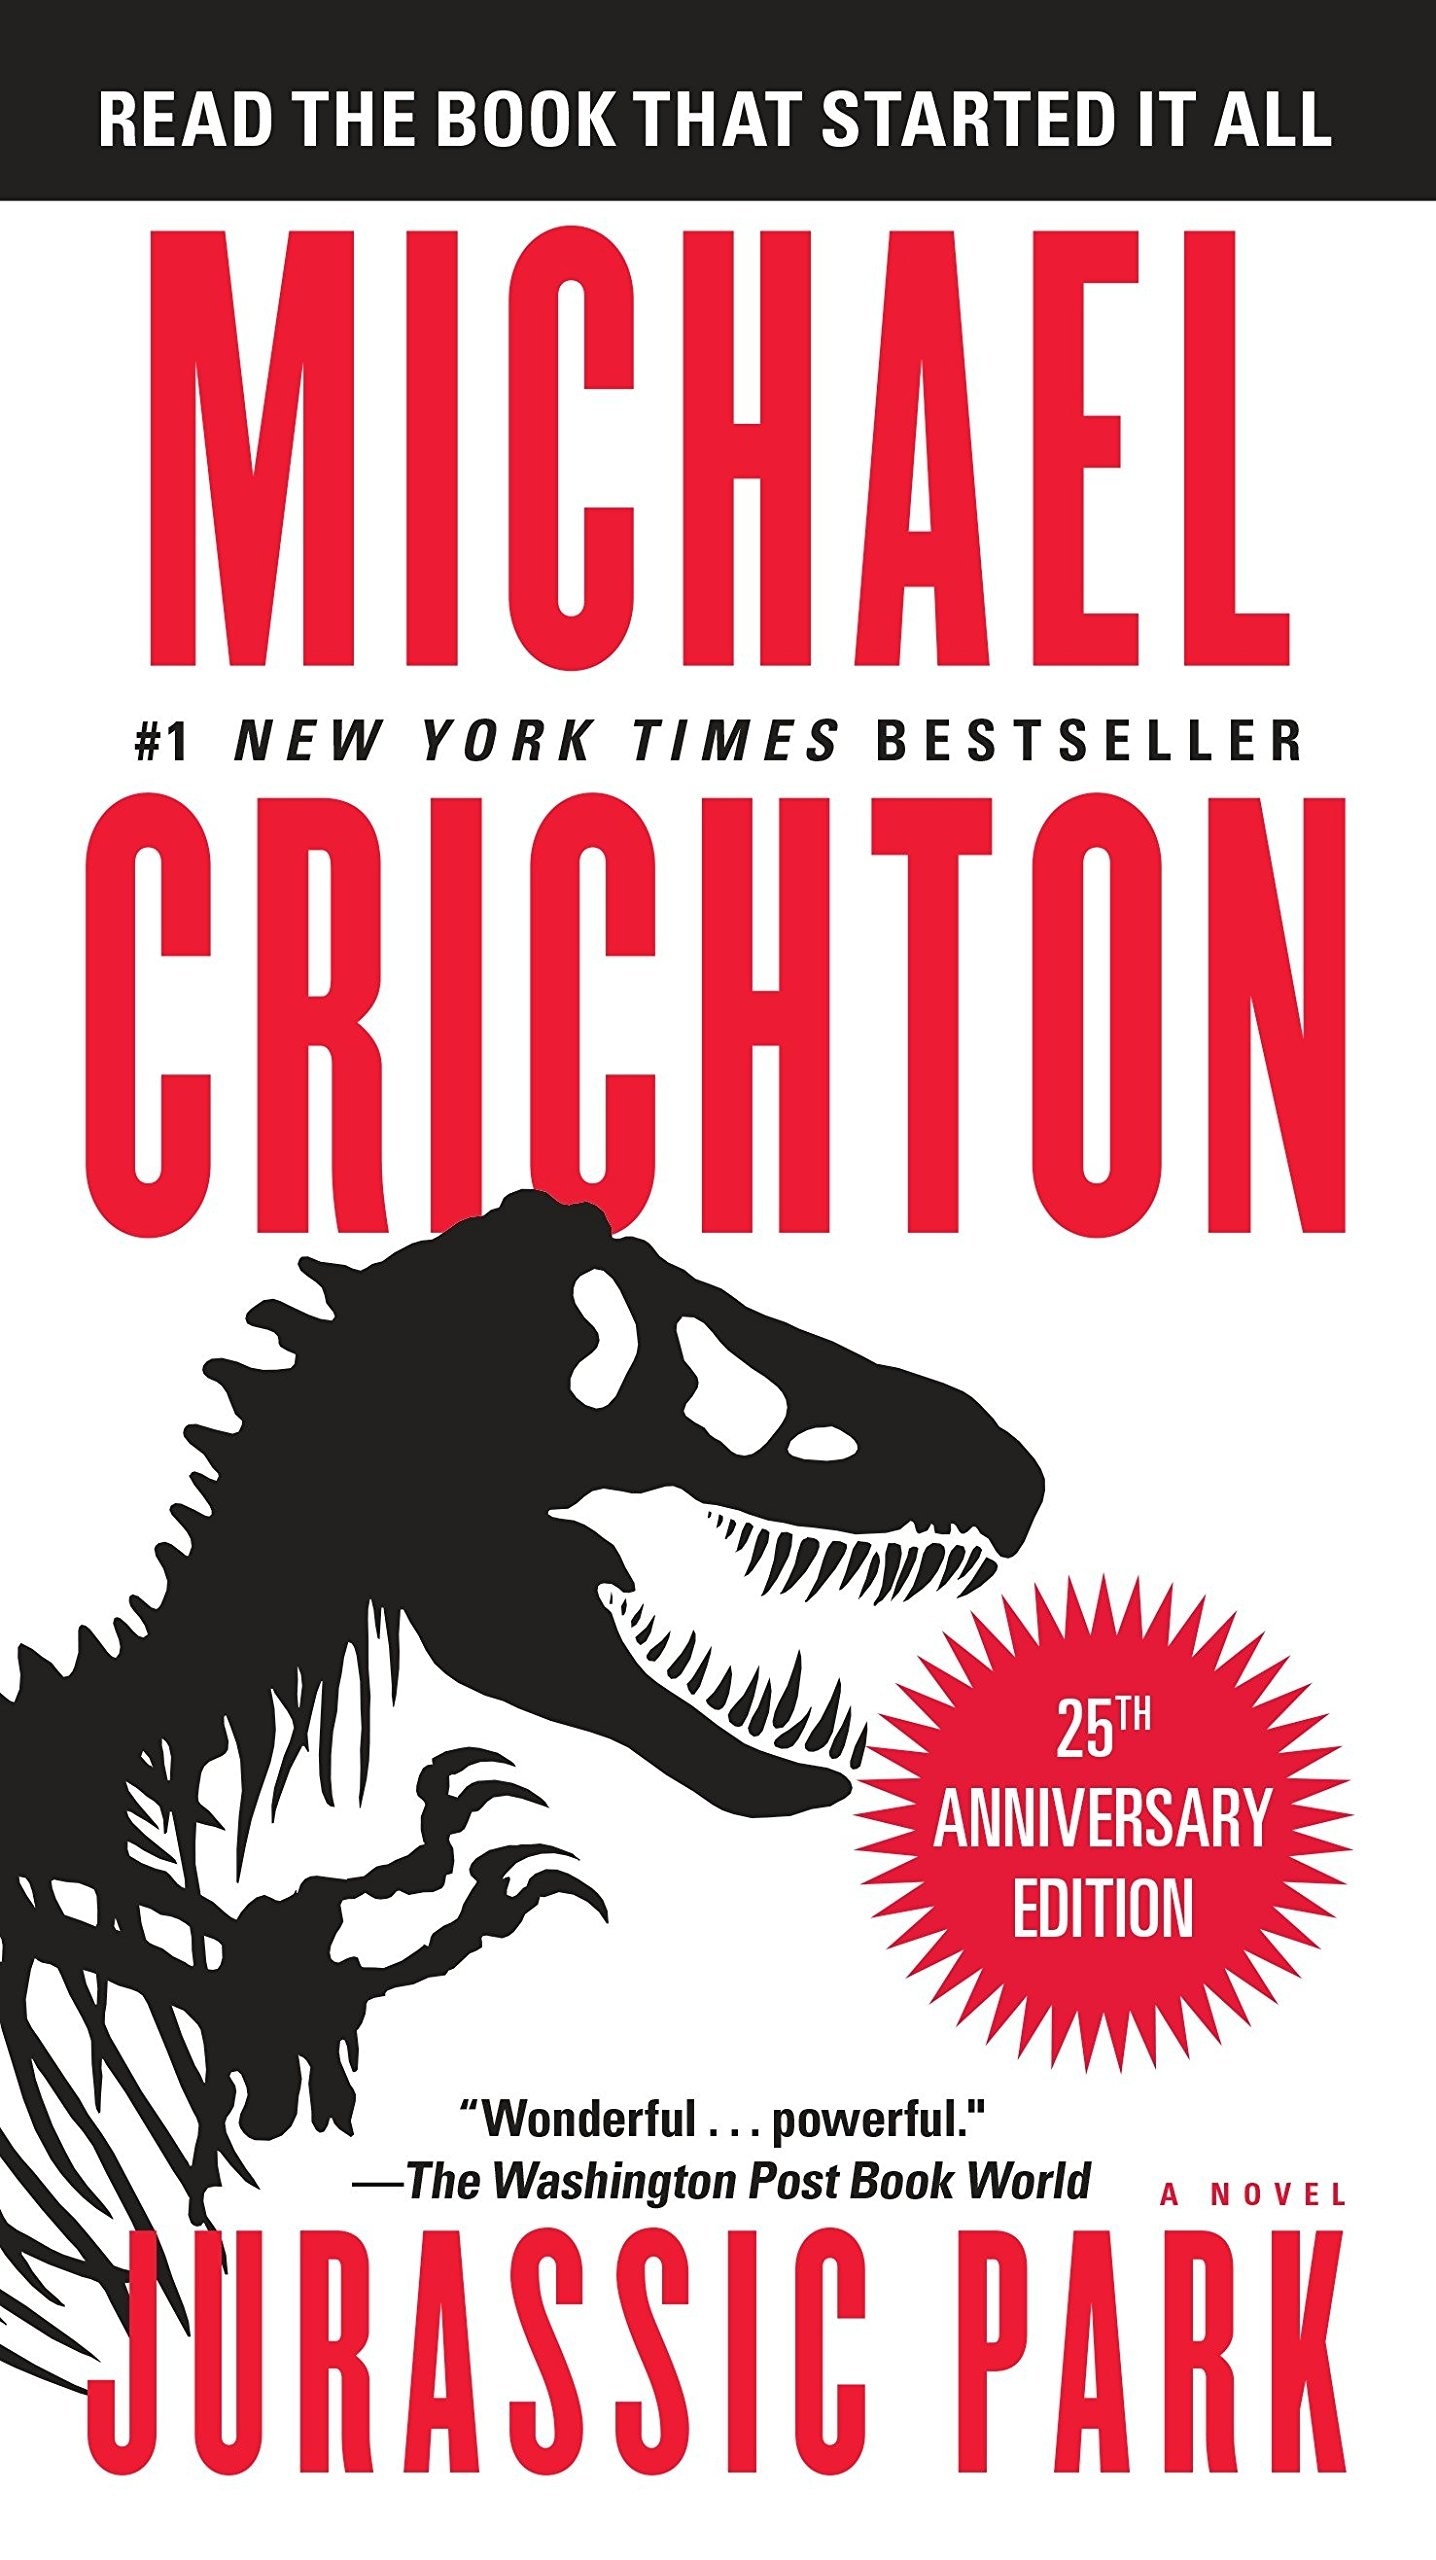 The cover of &quot;Jurassic Park&quot; by Michael Crichton